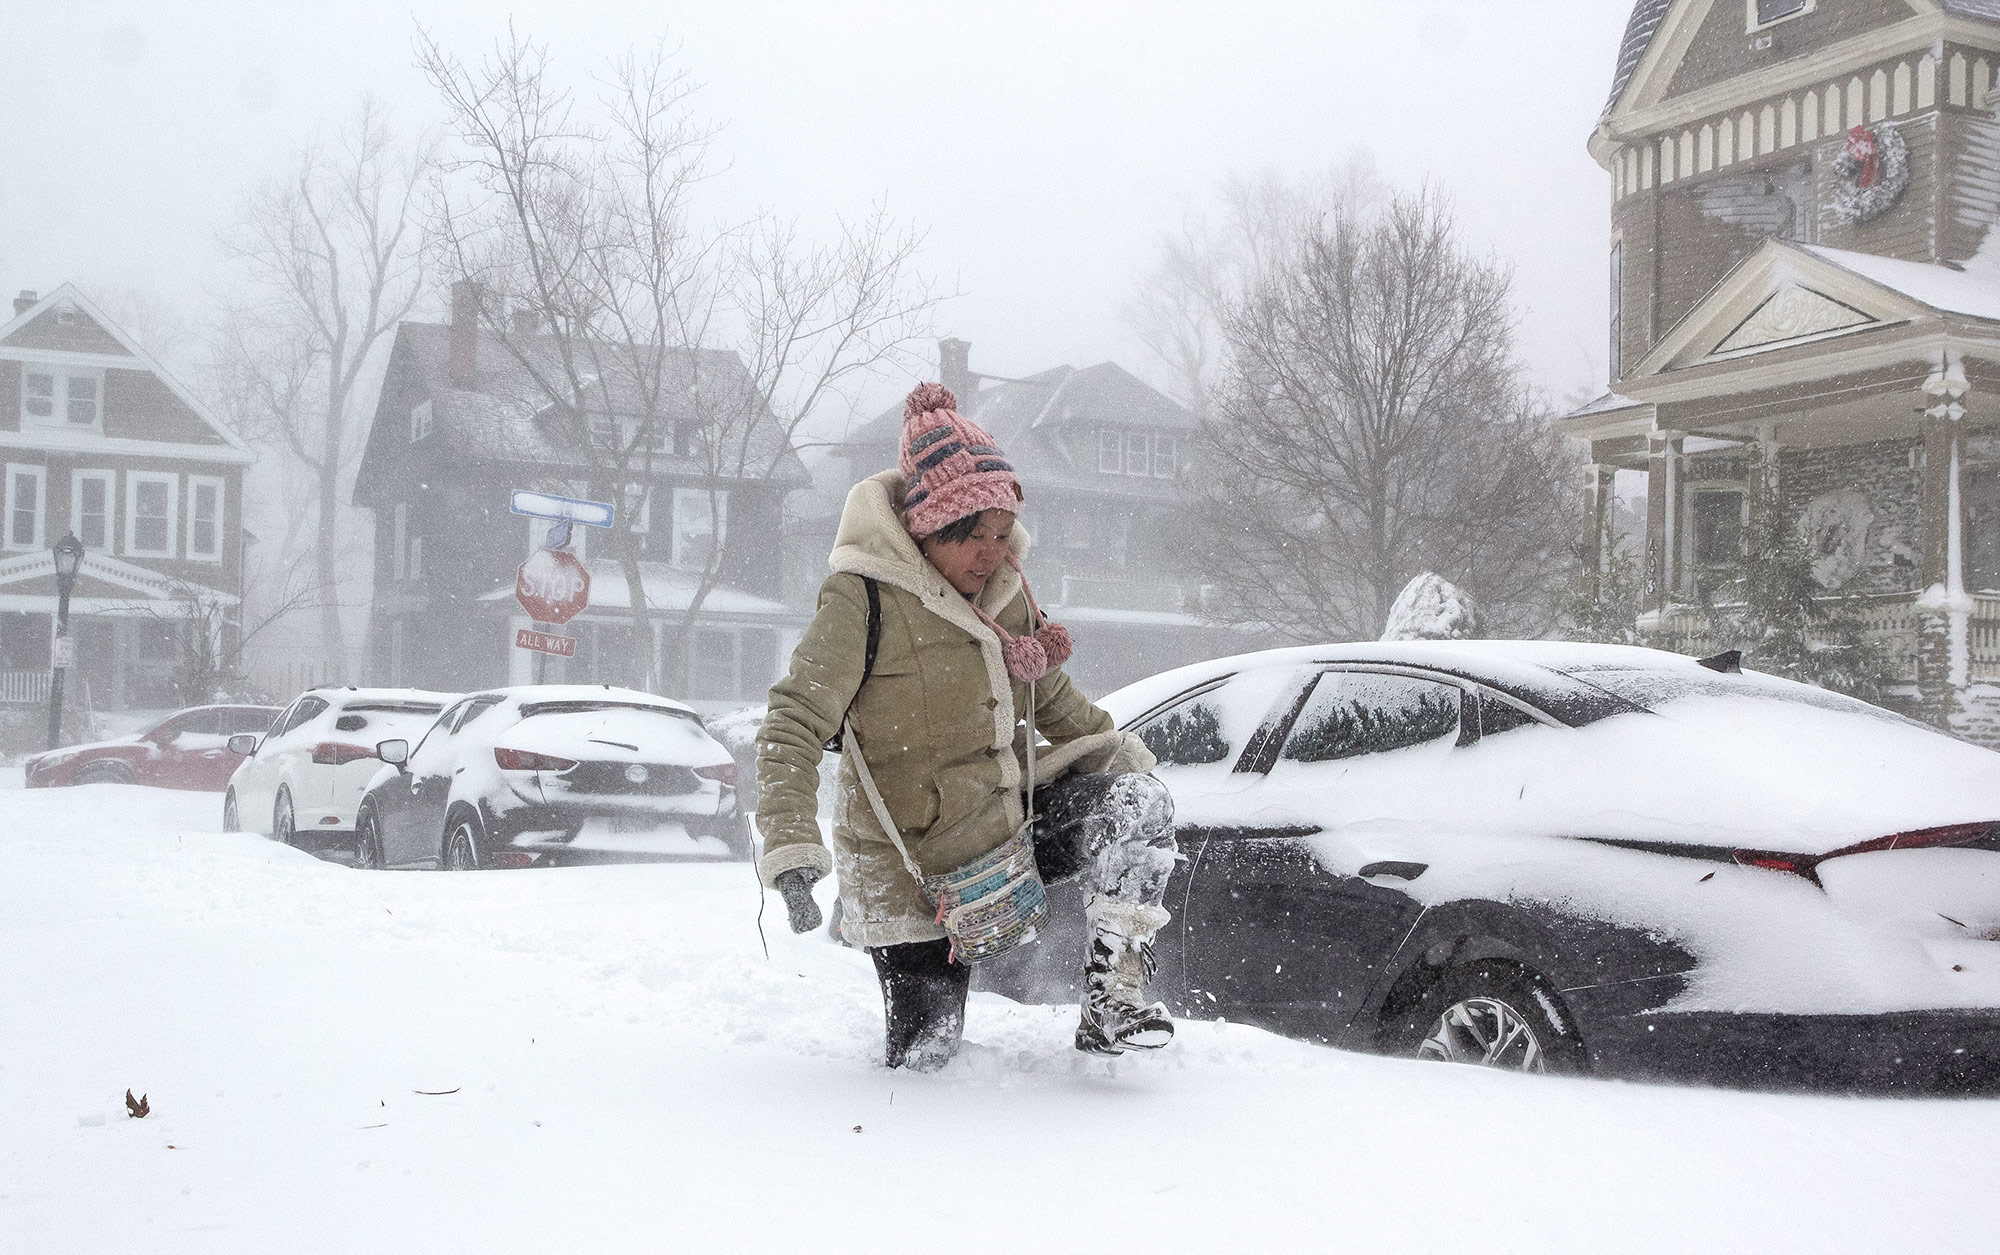 The Powerful Winter Storm Kills At least 22 People Across US.